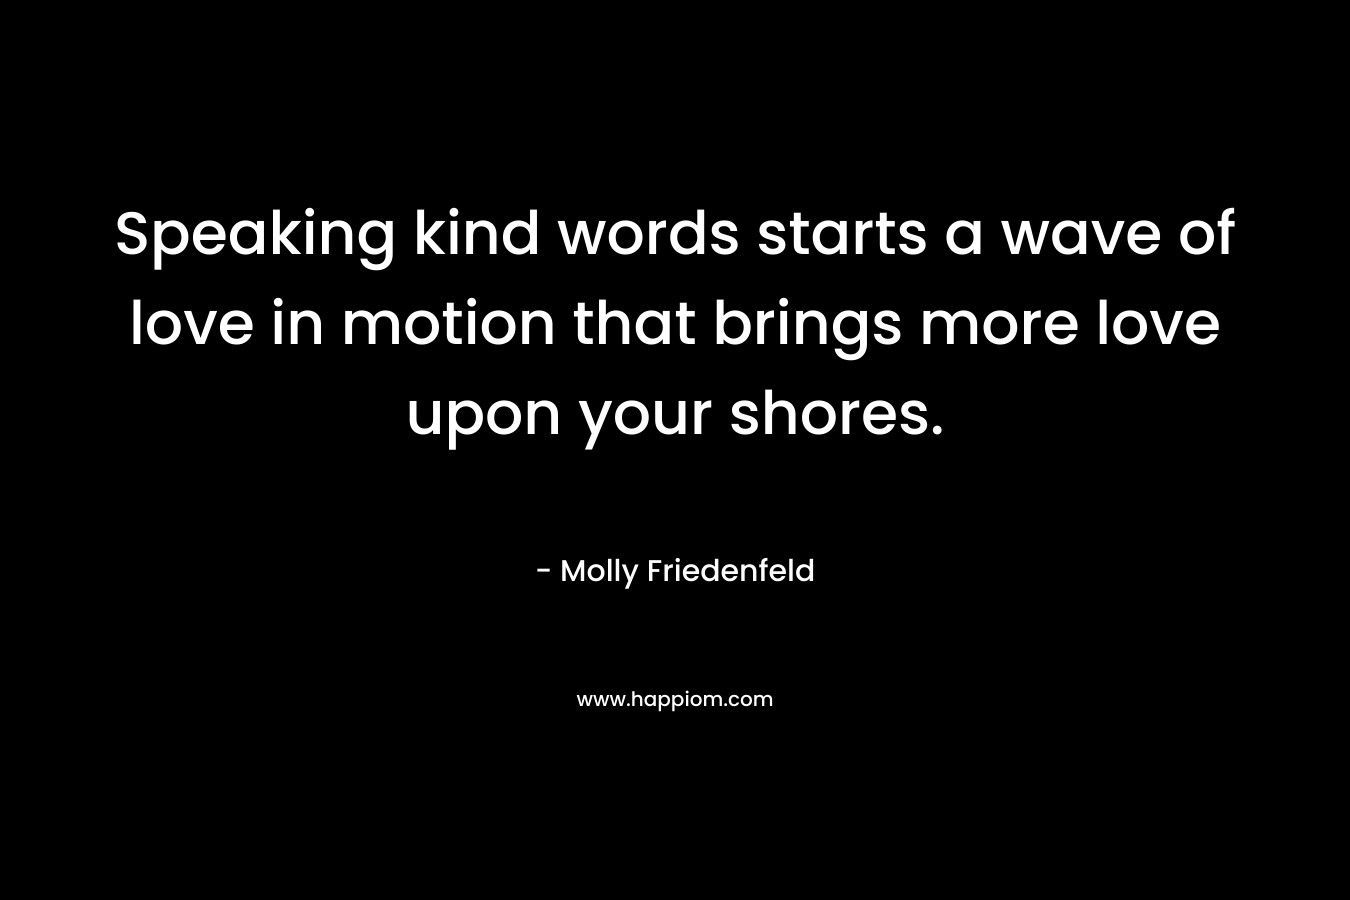 Speaking kind words starts a wave of love in motion that brings more love upon your shores. – Molly Friedenfeld